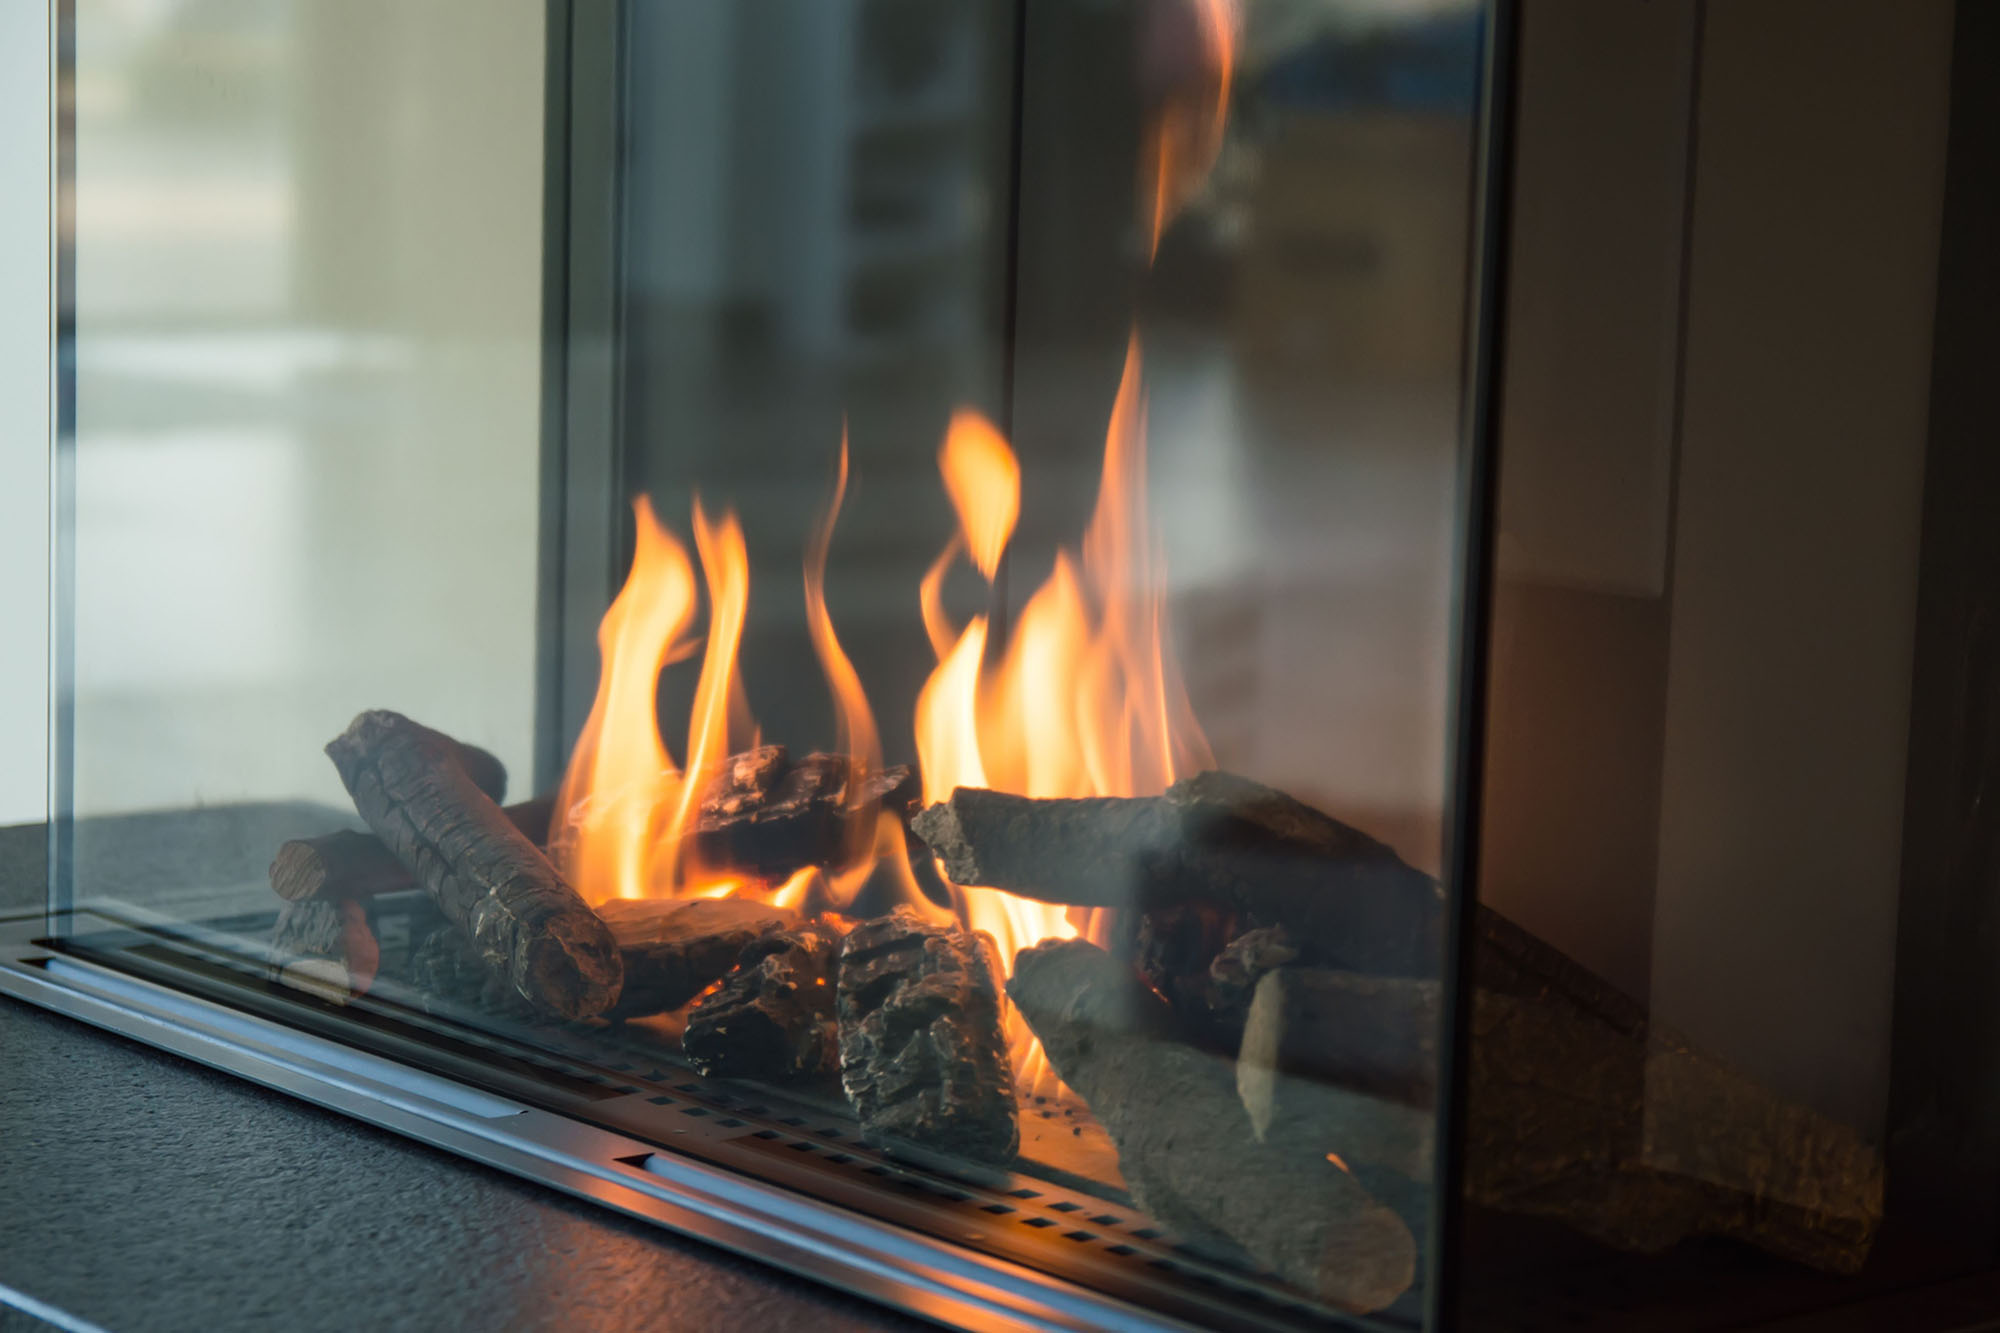 Fireplace repairs, installations, and maintenance